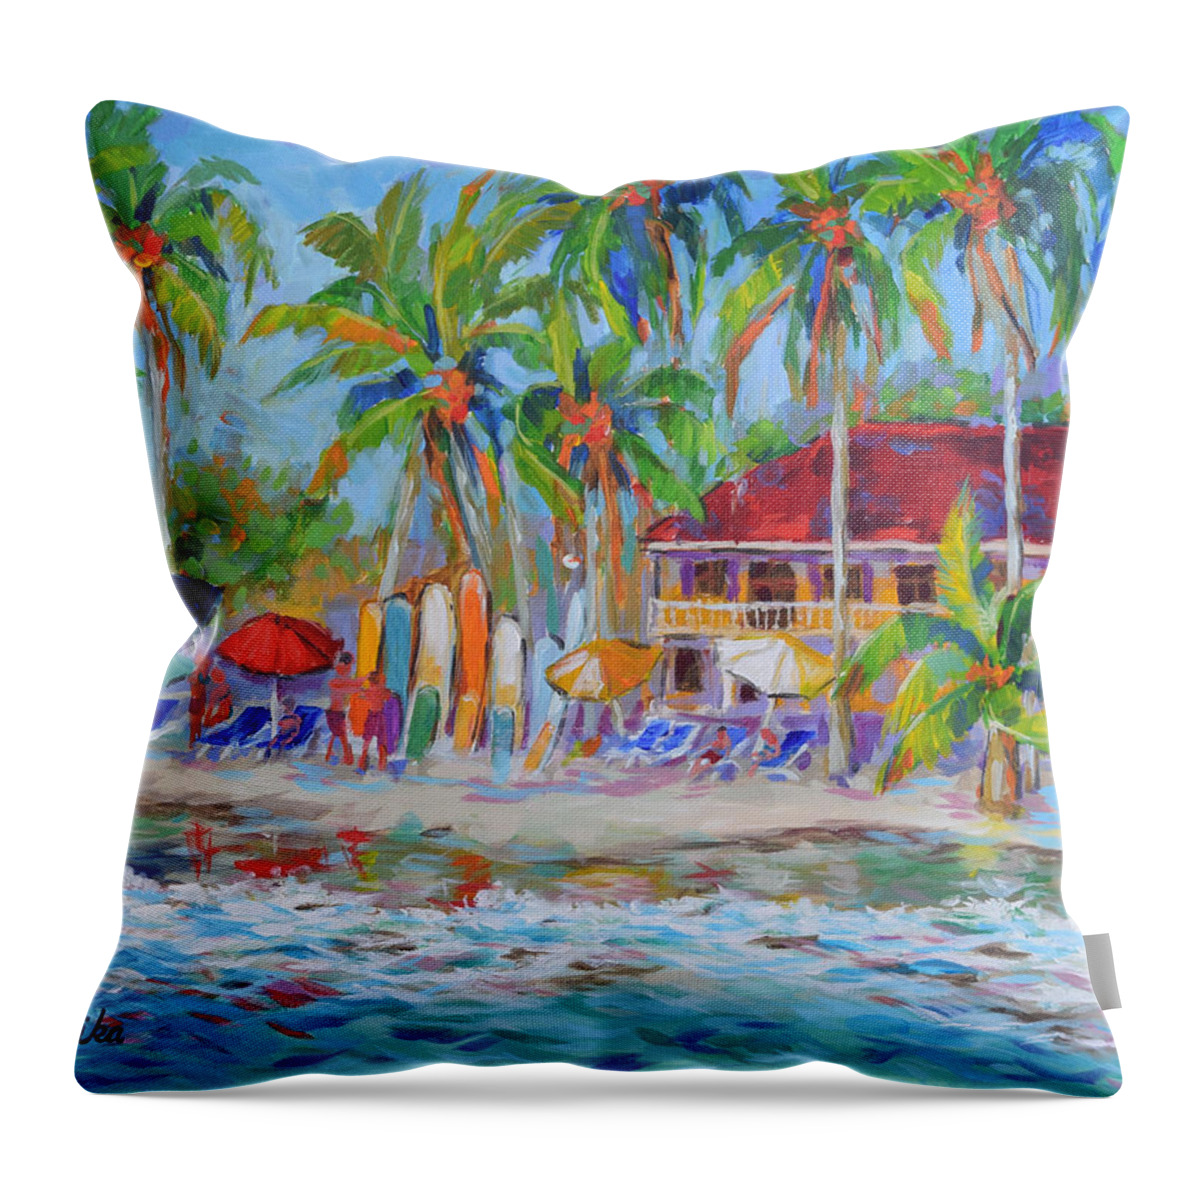 Tropical Throw Pillow featuring the painting Weekend Escape by Jyotika Shroff